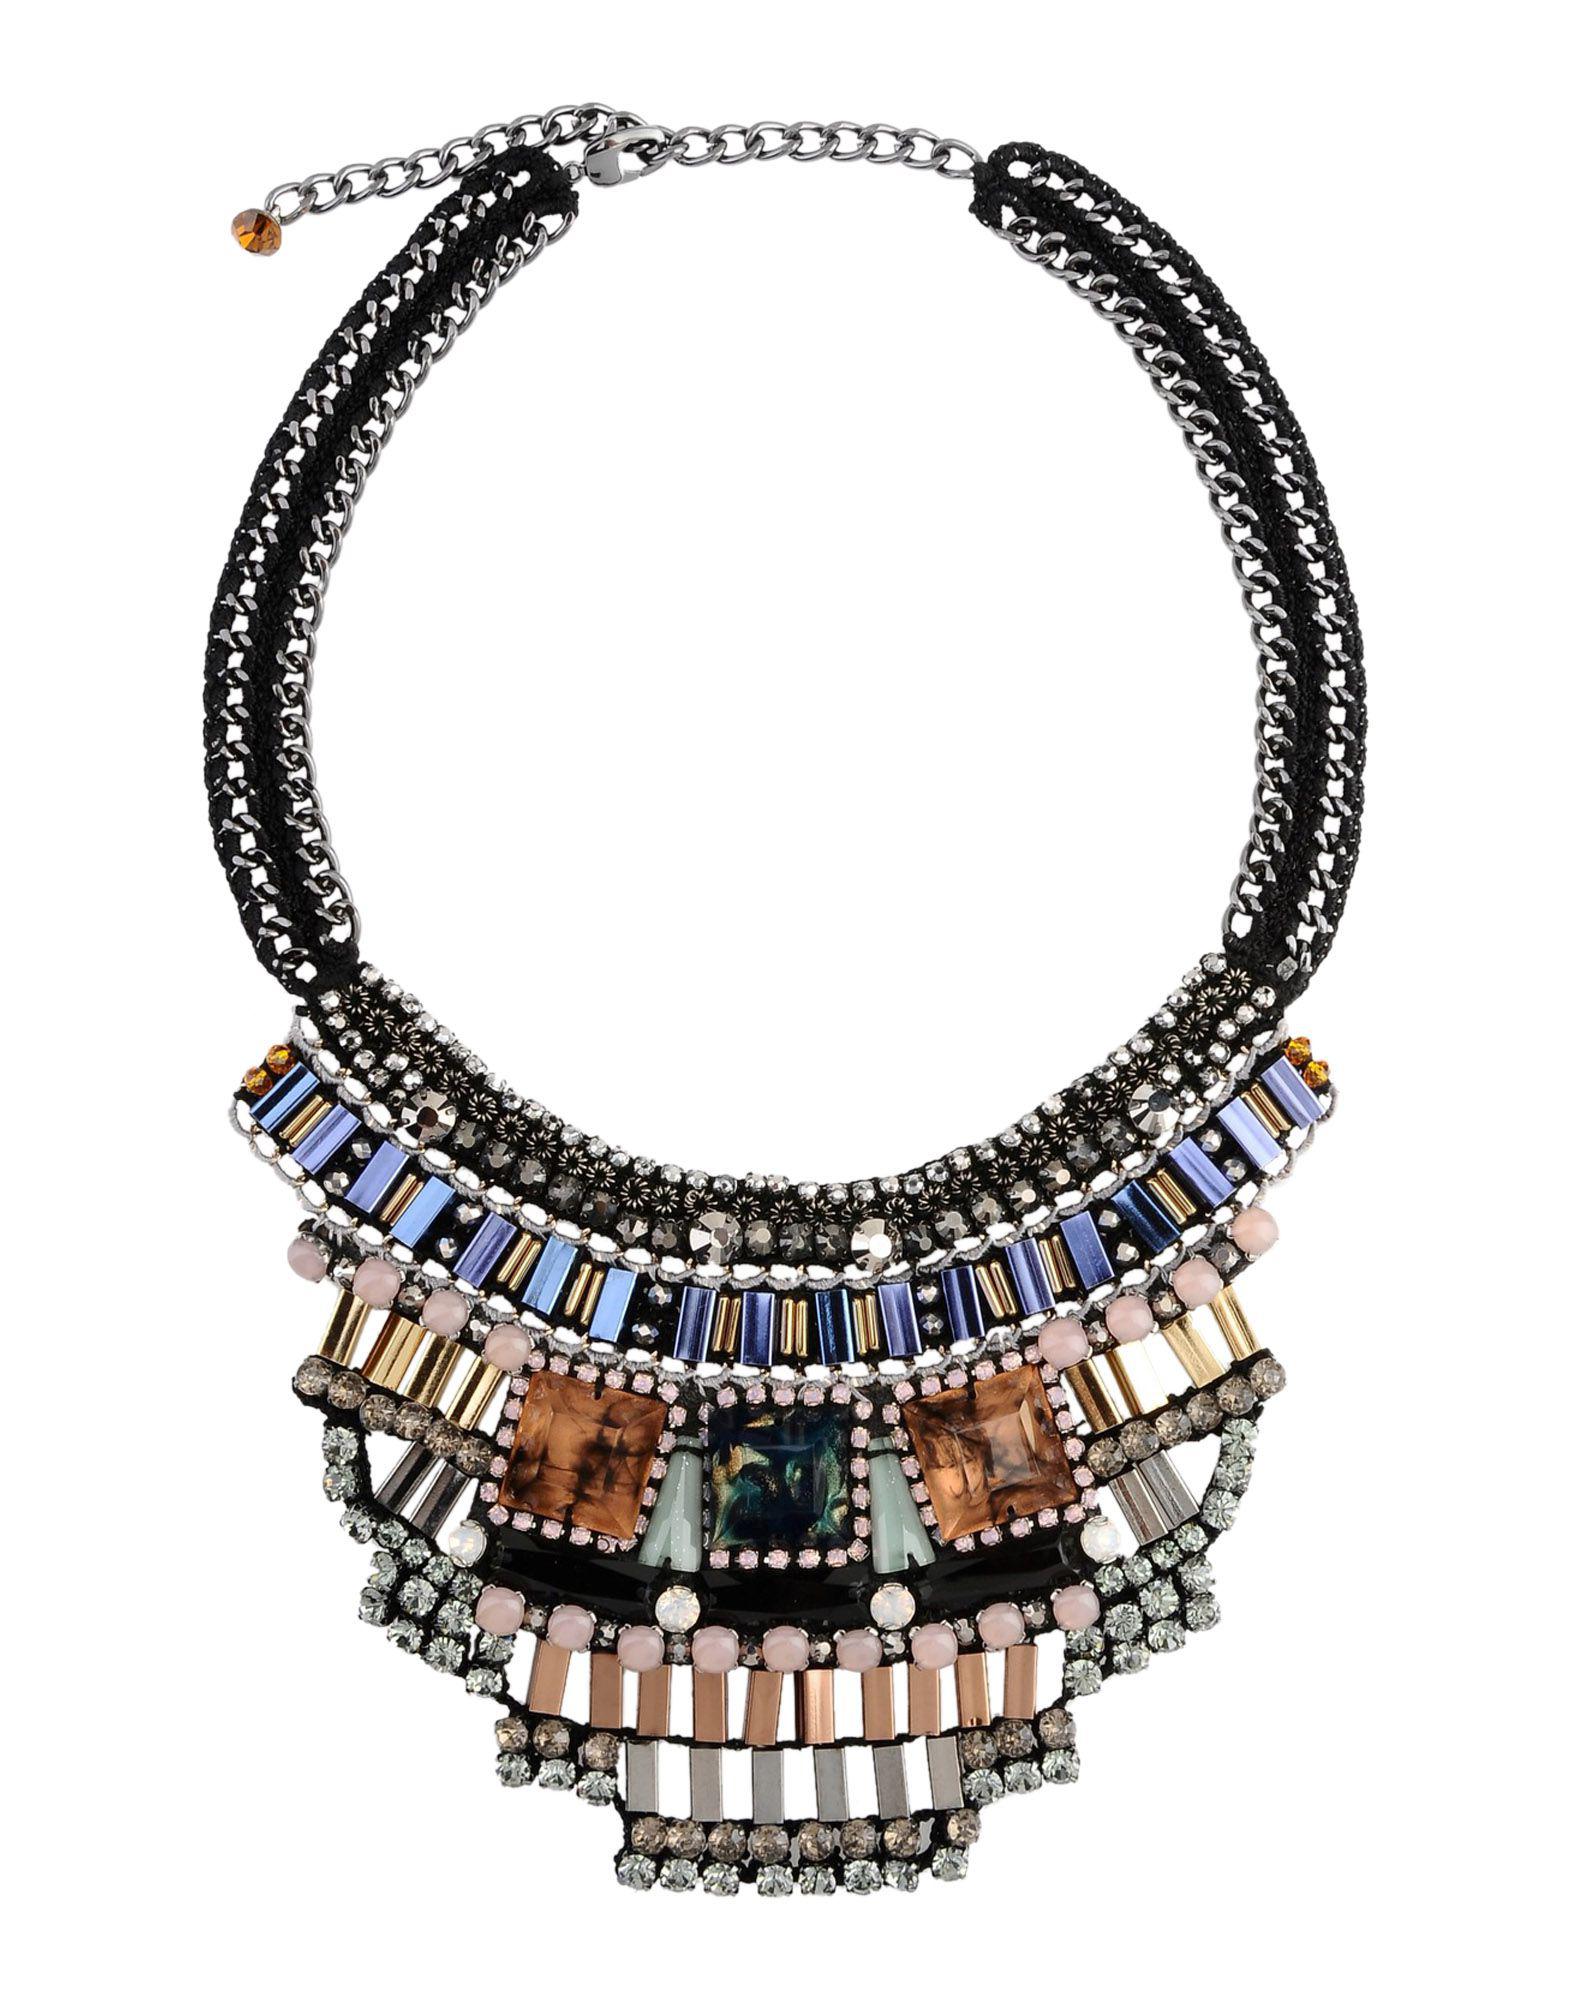 Lyst - Nocturne Necklace in Black